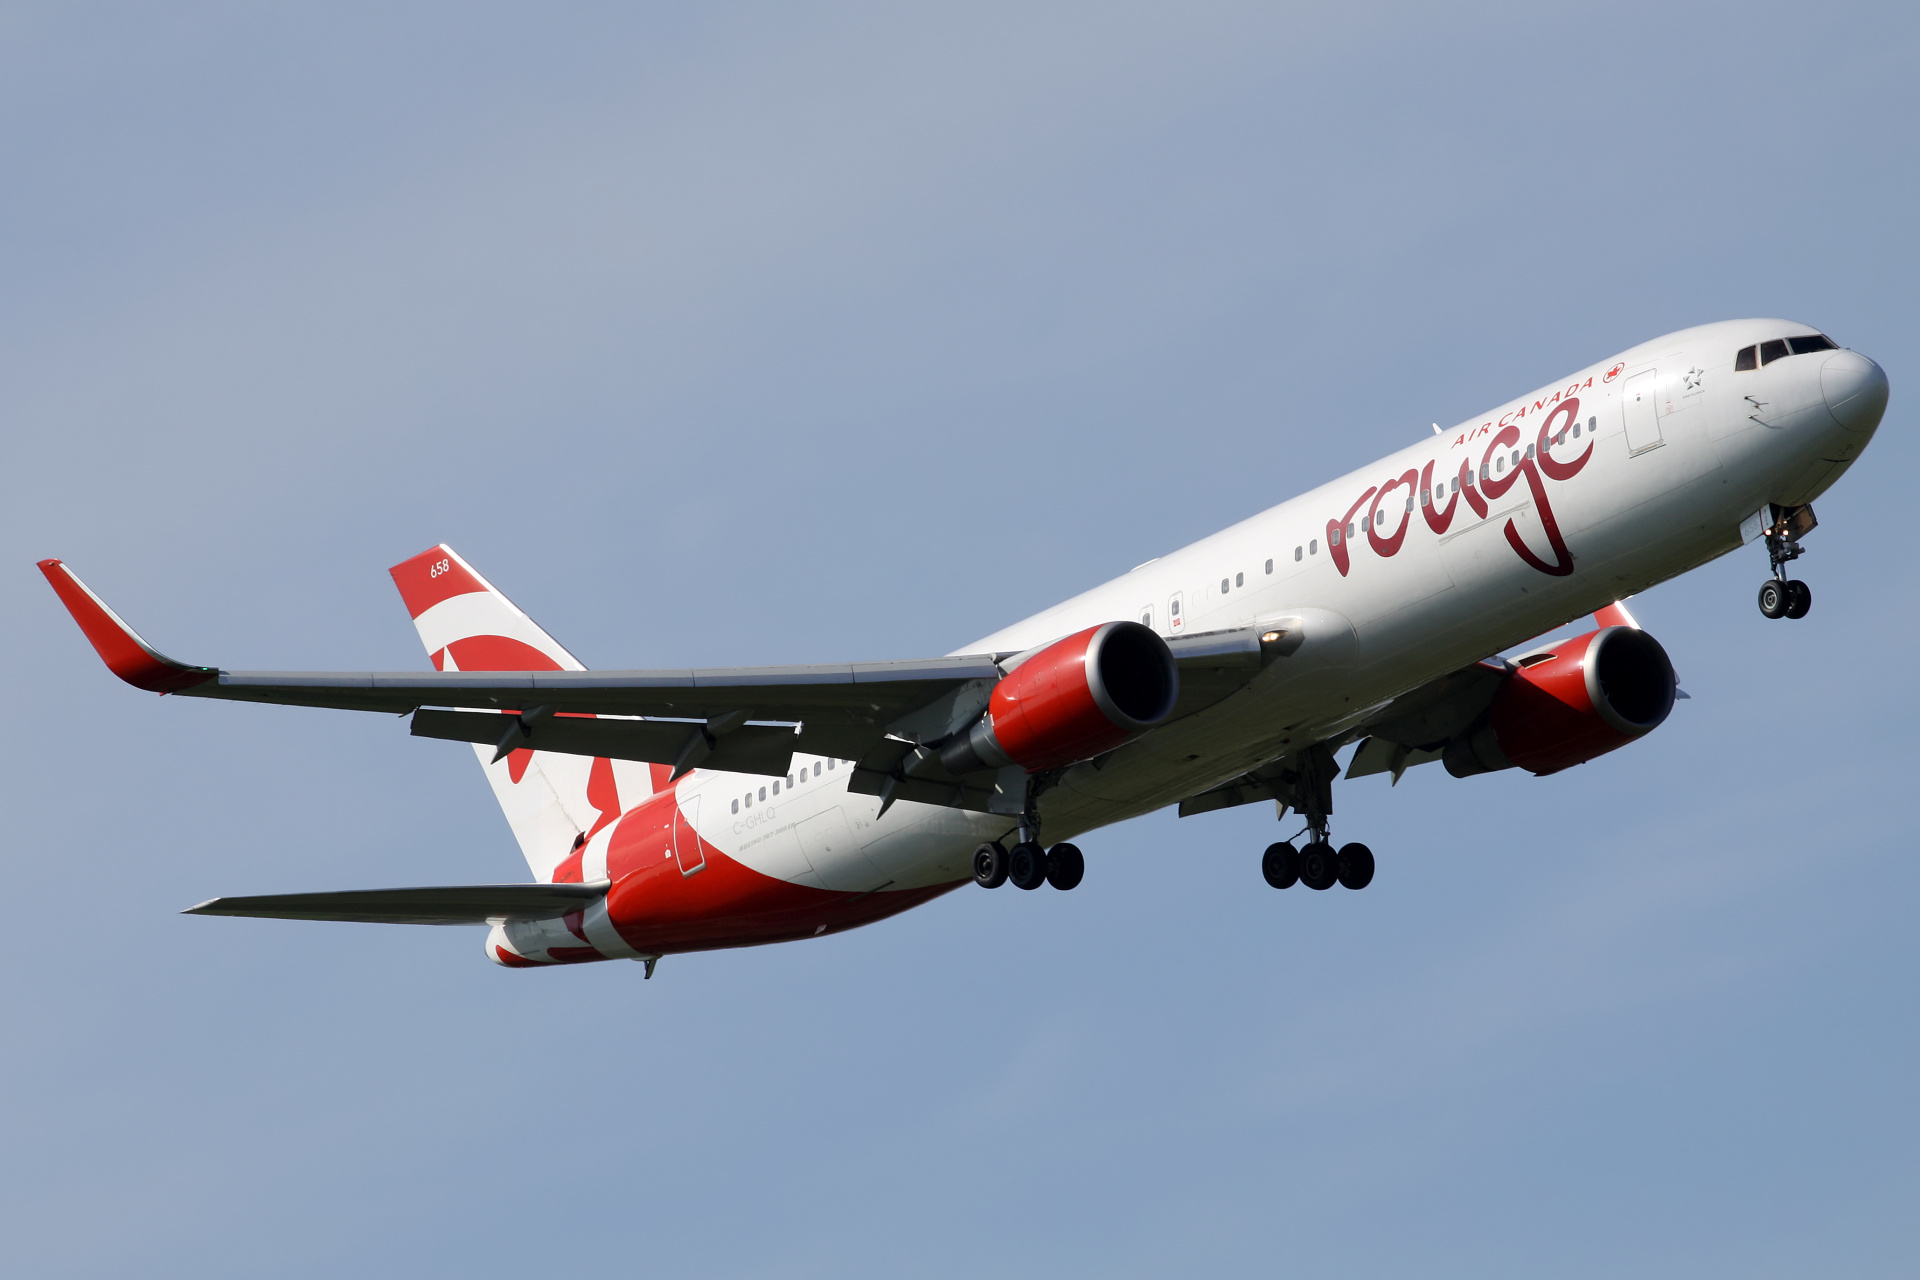 C-GHLQ (Aircraft » EPWA Spotting » Boeing 767-300 » Air Canada Rouge)